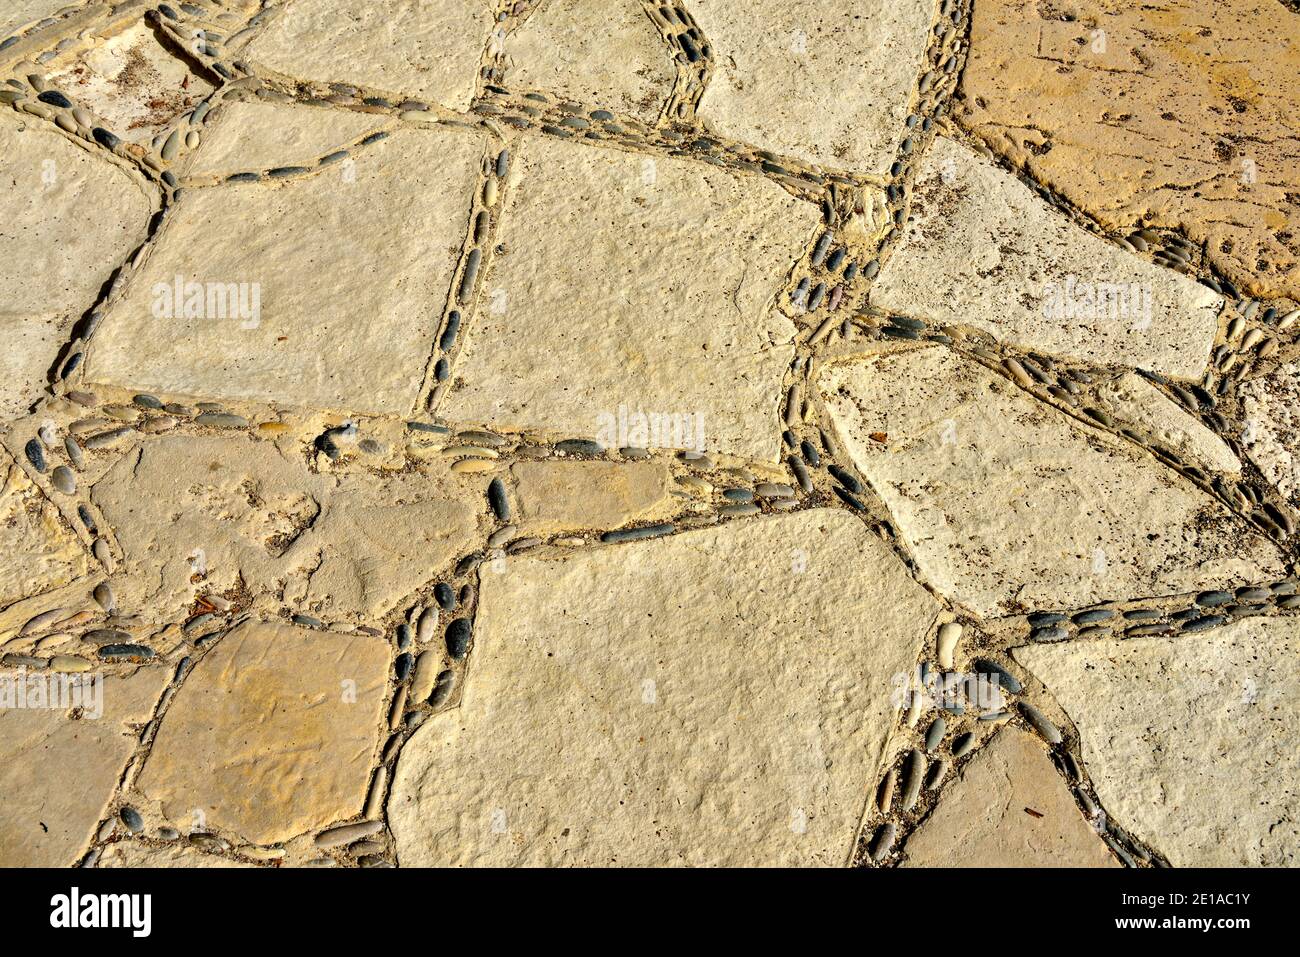 Stone “crazy paving” pavement with small pebbles between the larger stones by beach Stock Photo